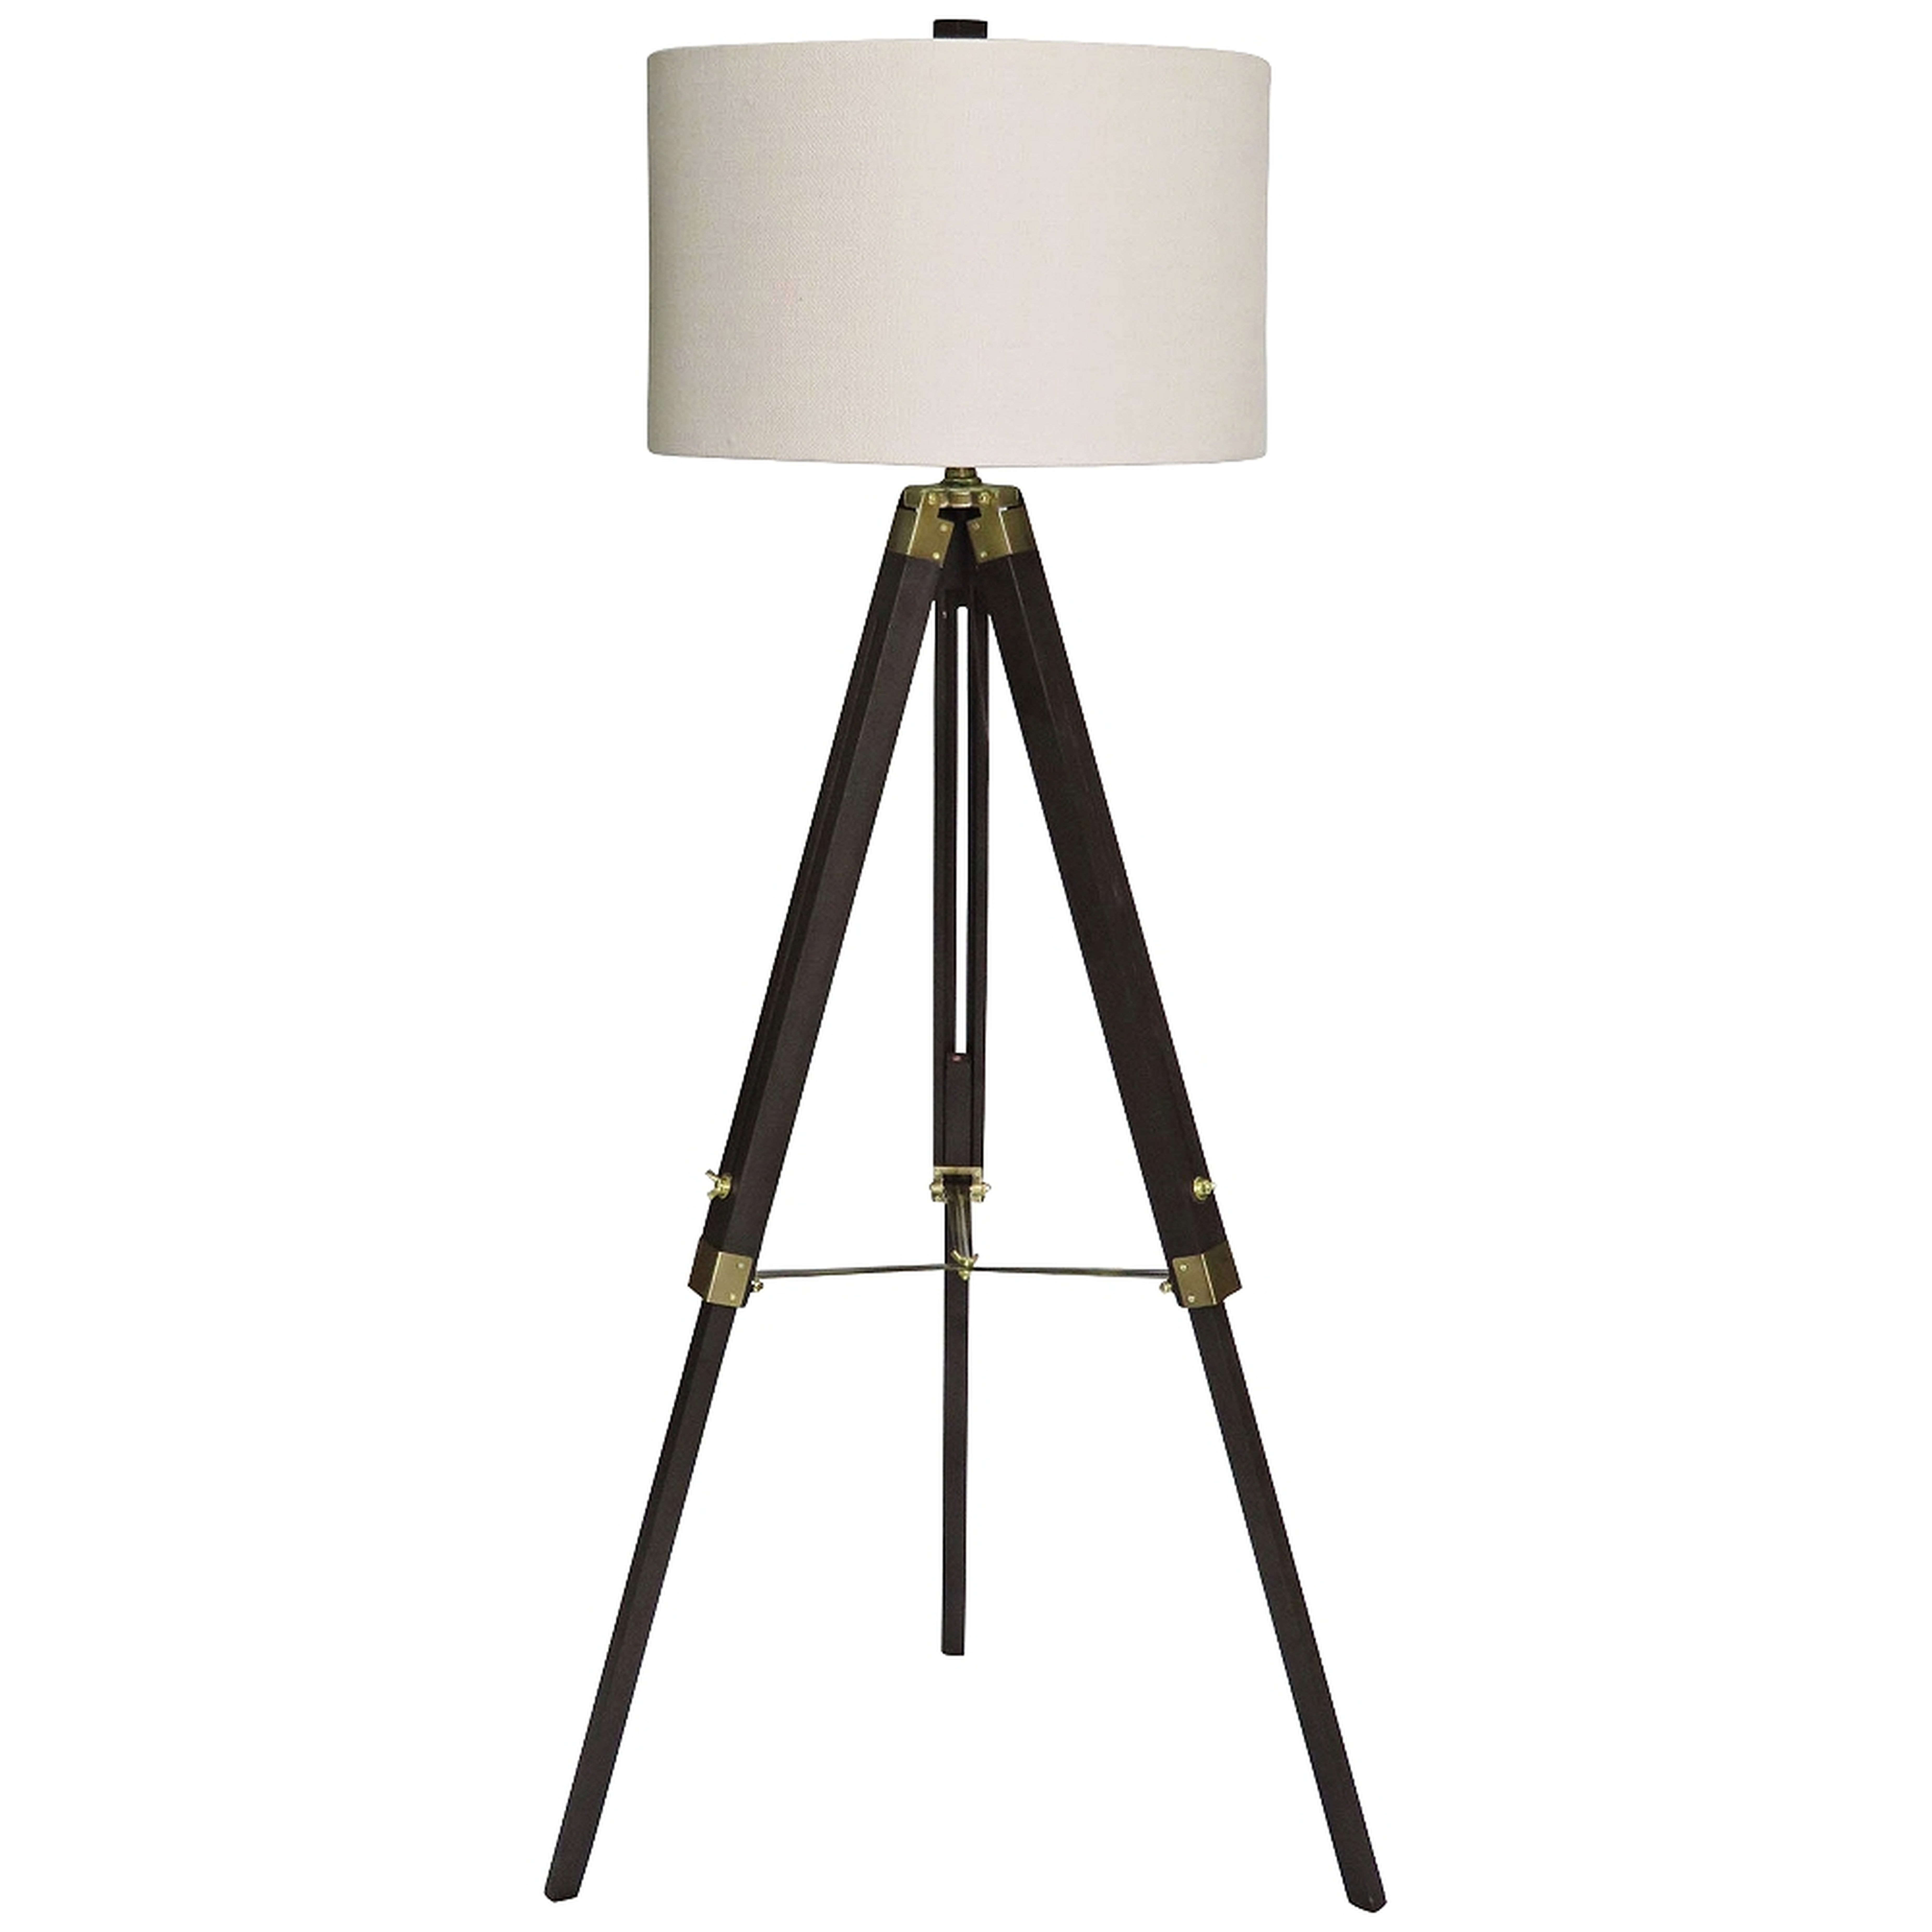 Manda Weathered Espresso and Antique Brass Tripod Floor Lamp - Style # 41T26 - Lamps Plus